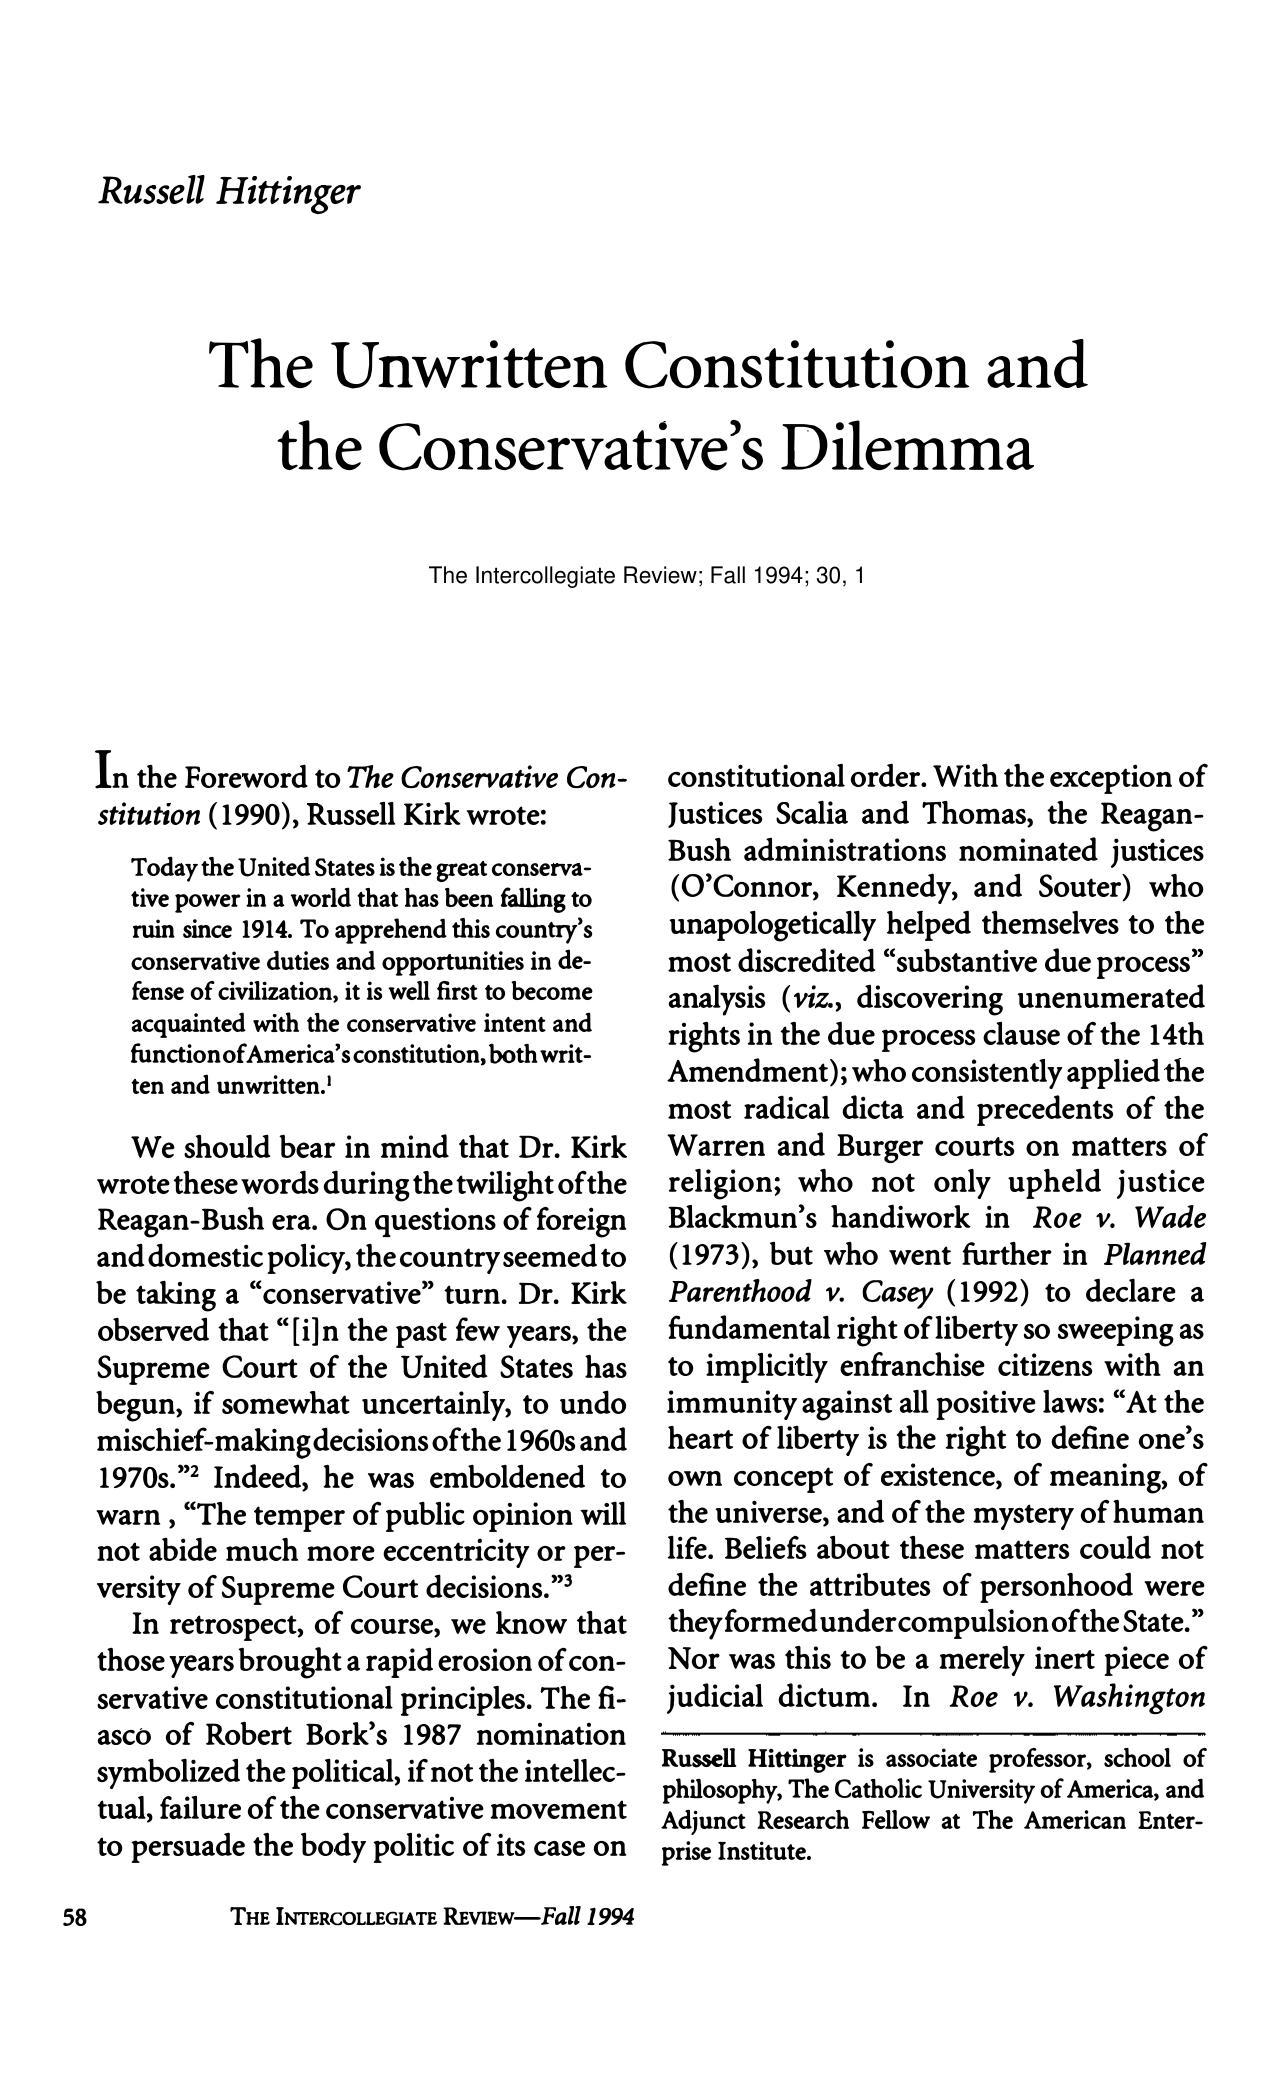 Unwritten Constitution and Conservative's Dilemma by Russell Rittinger